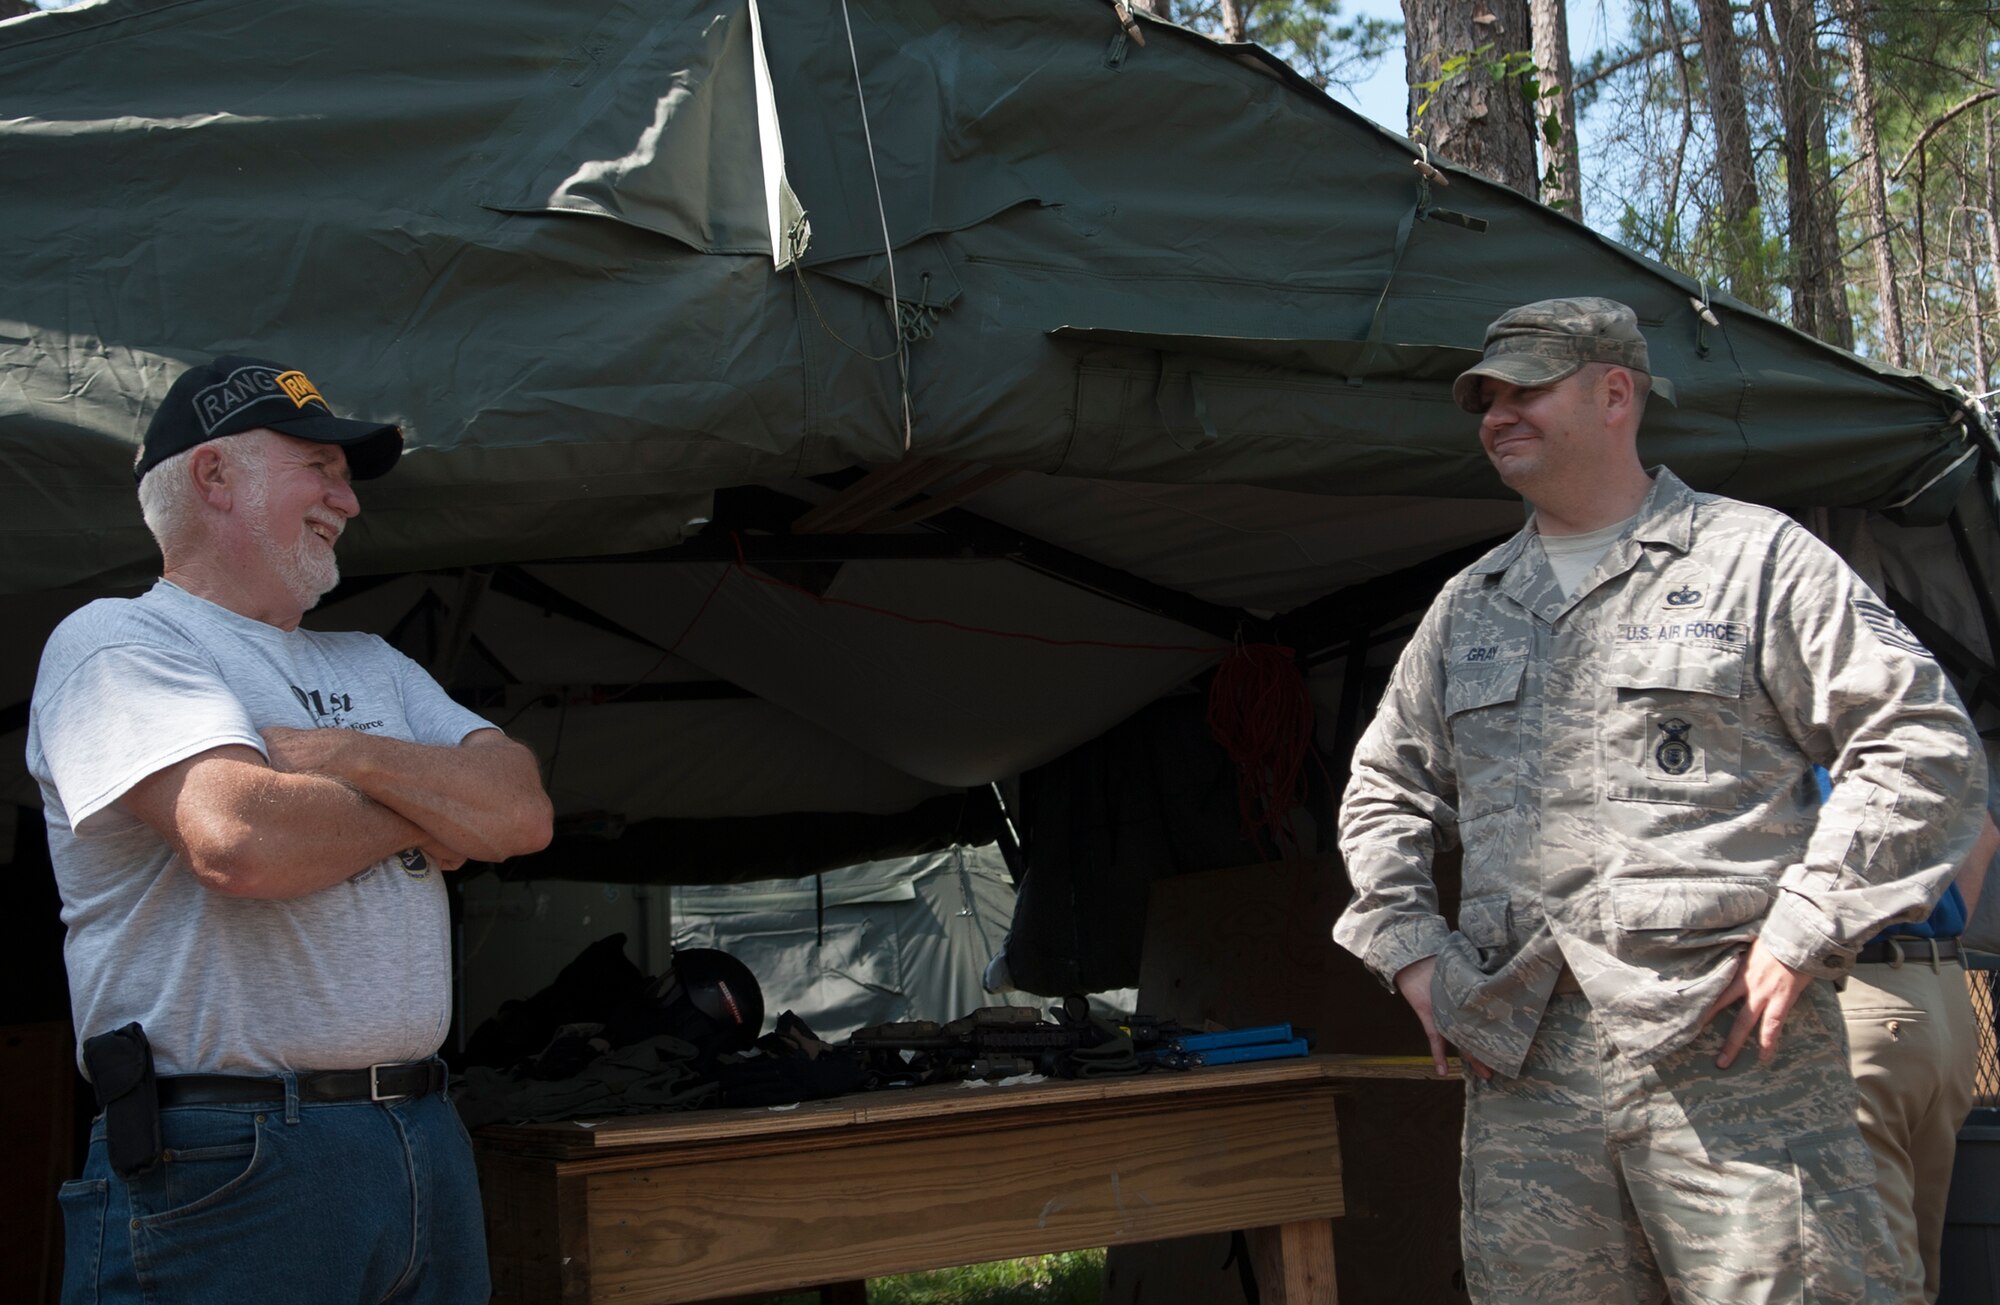 U.S. Air Force Tech Sgt. Sean Gray, 822nd Base Defense Squadron NCO in charge, converses with a former Safesider at Moody Air Force Base Ga., May 18, 2013.  The Safesider shared stories of his time in Vietnam with Gray. (U.S. Air Force photo by Airman 1st Class Sandra Marrero/Released)
